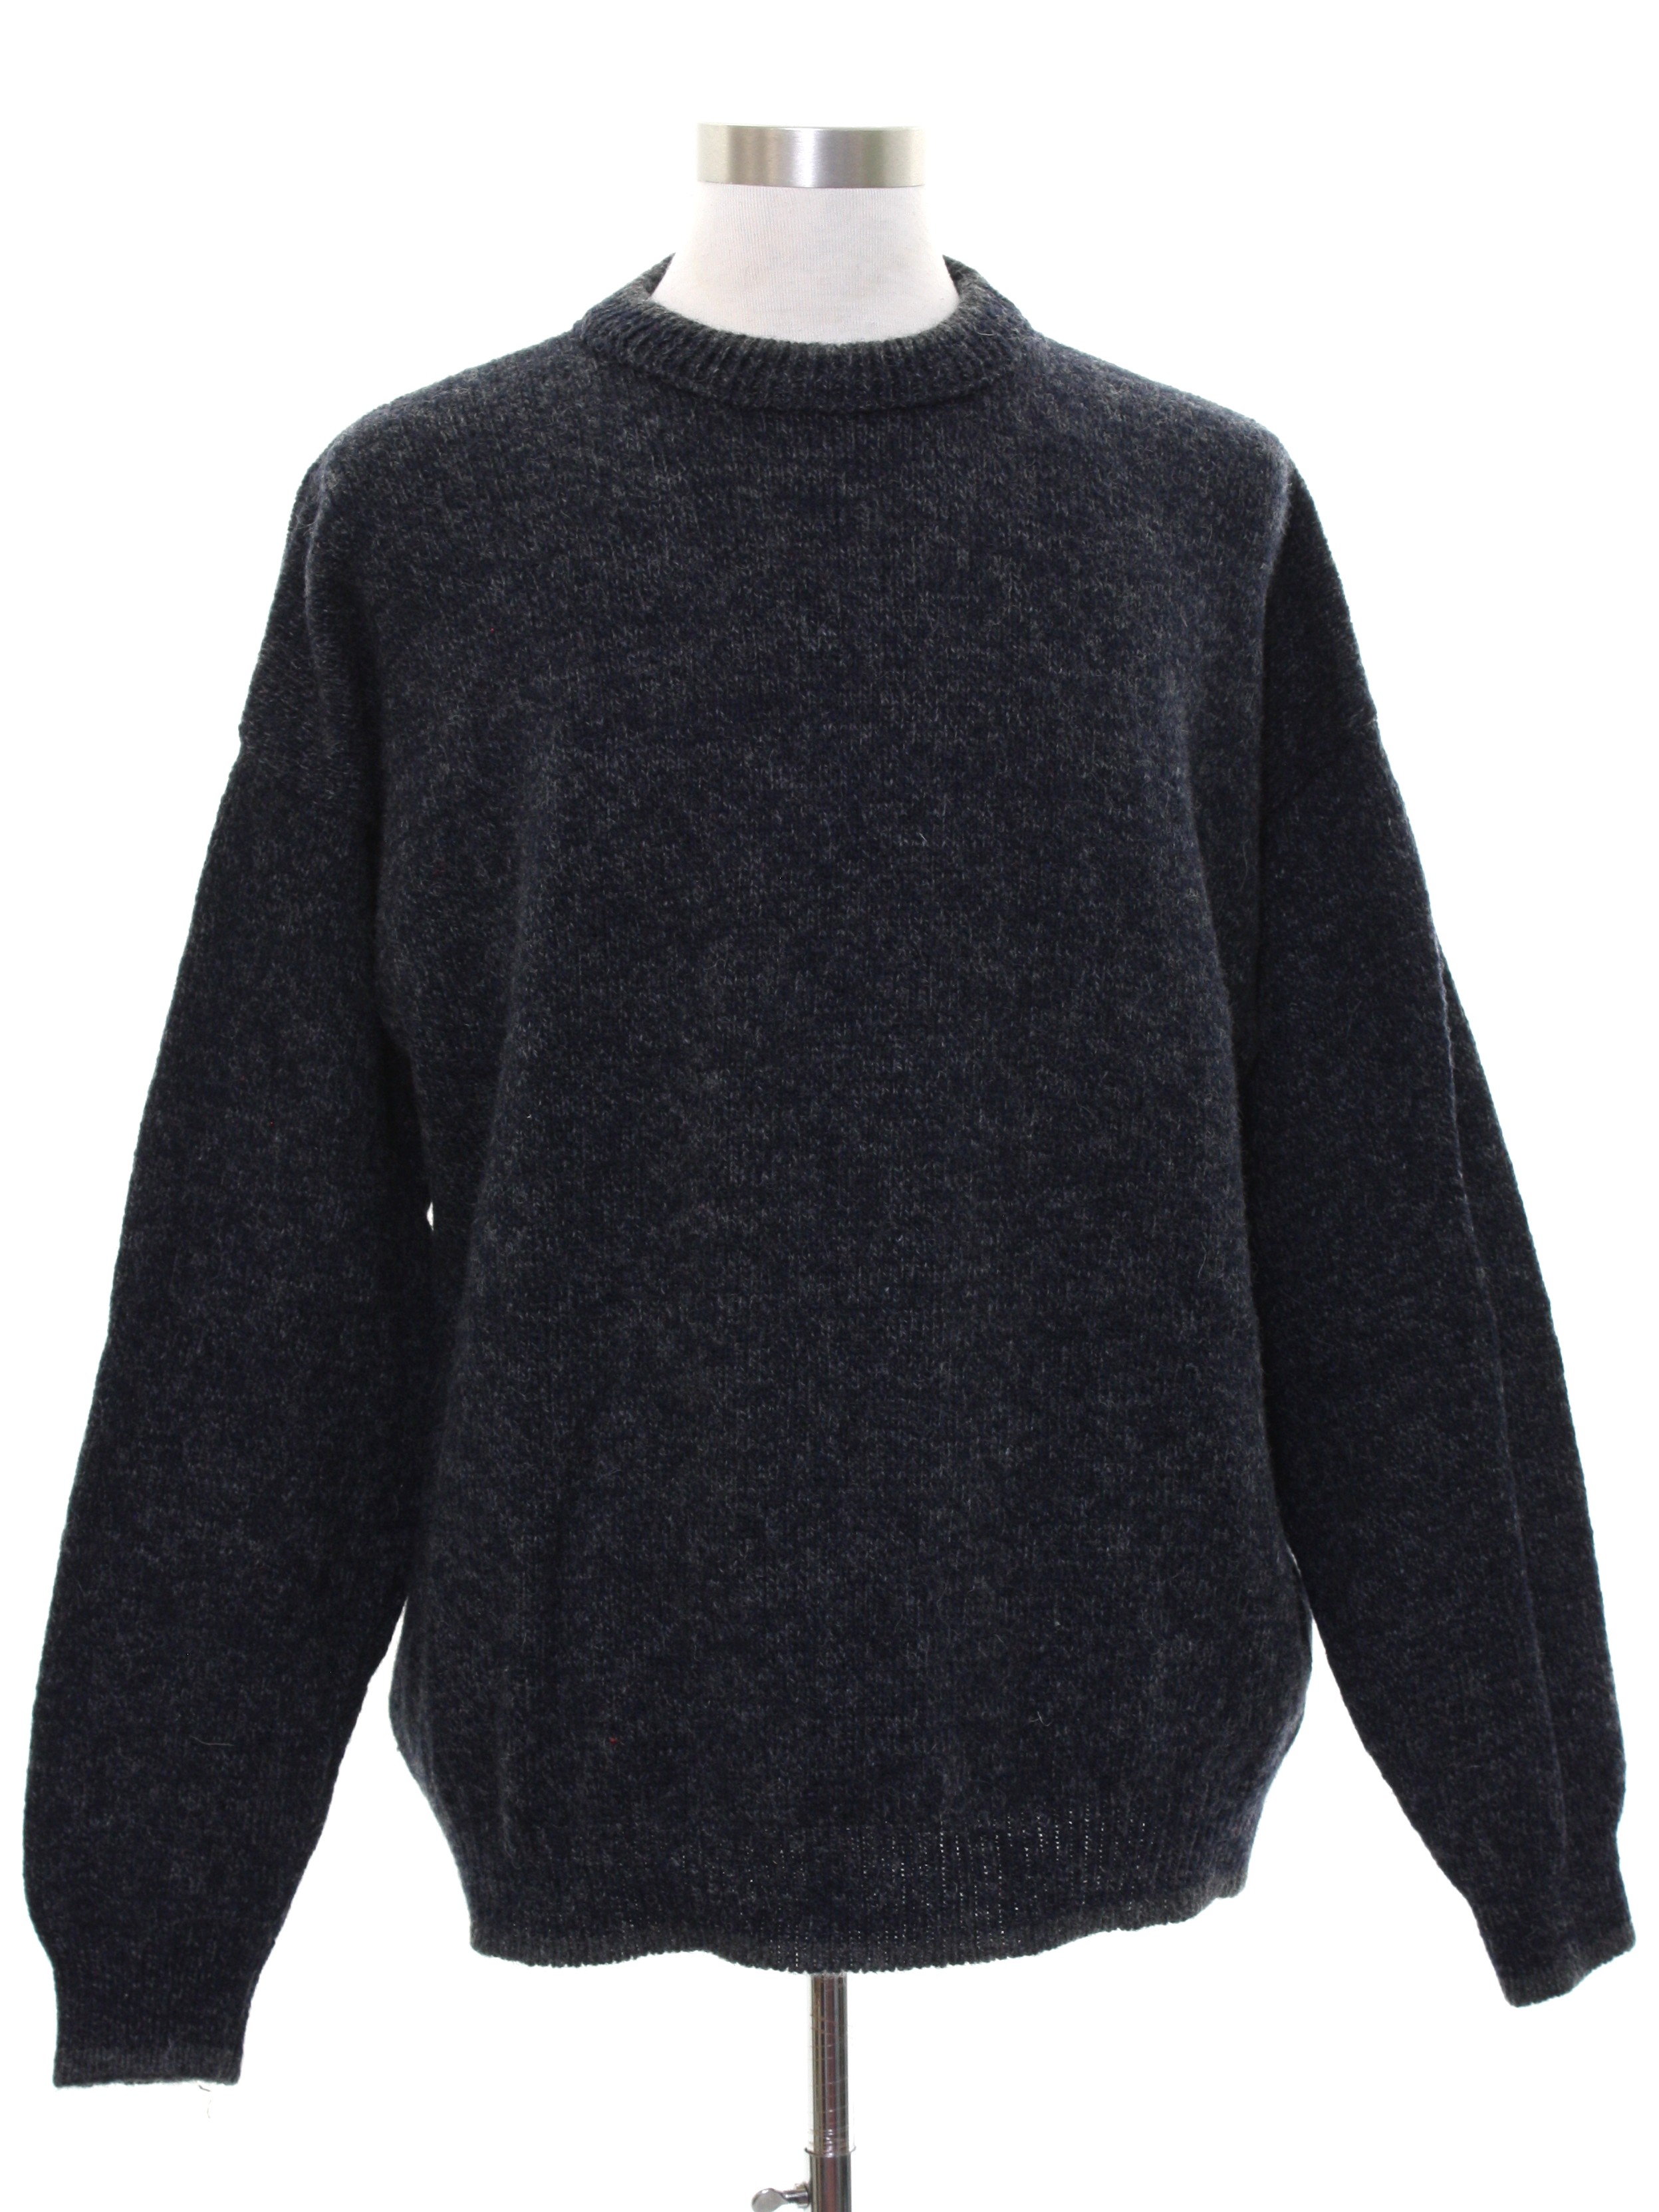 Woolrich 80's Vintage Sweater: 80s -Woolrich- Mens hazy black and grey ...